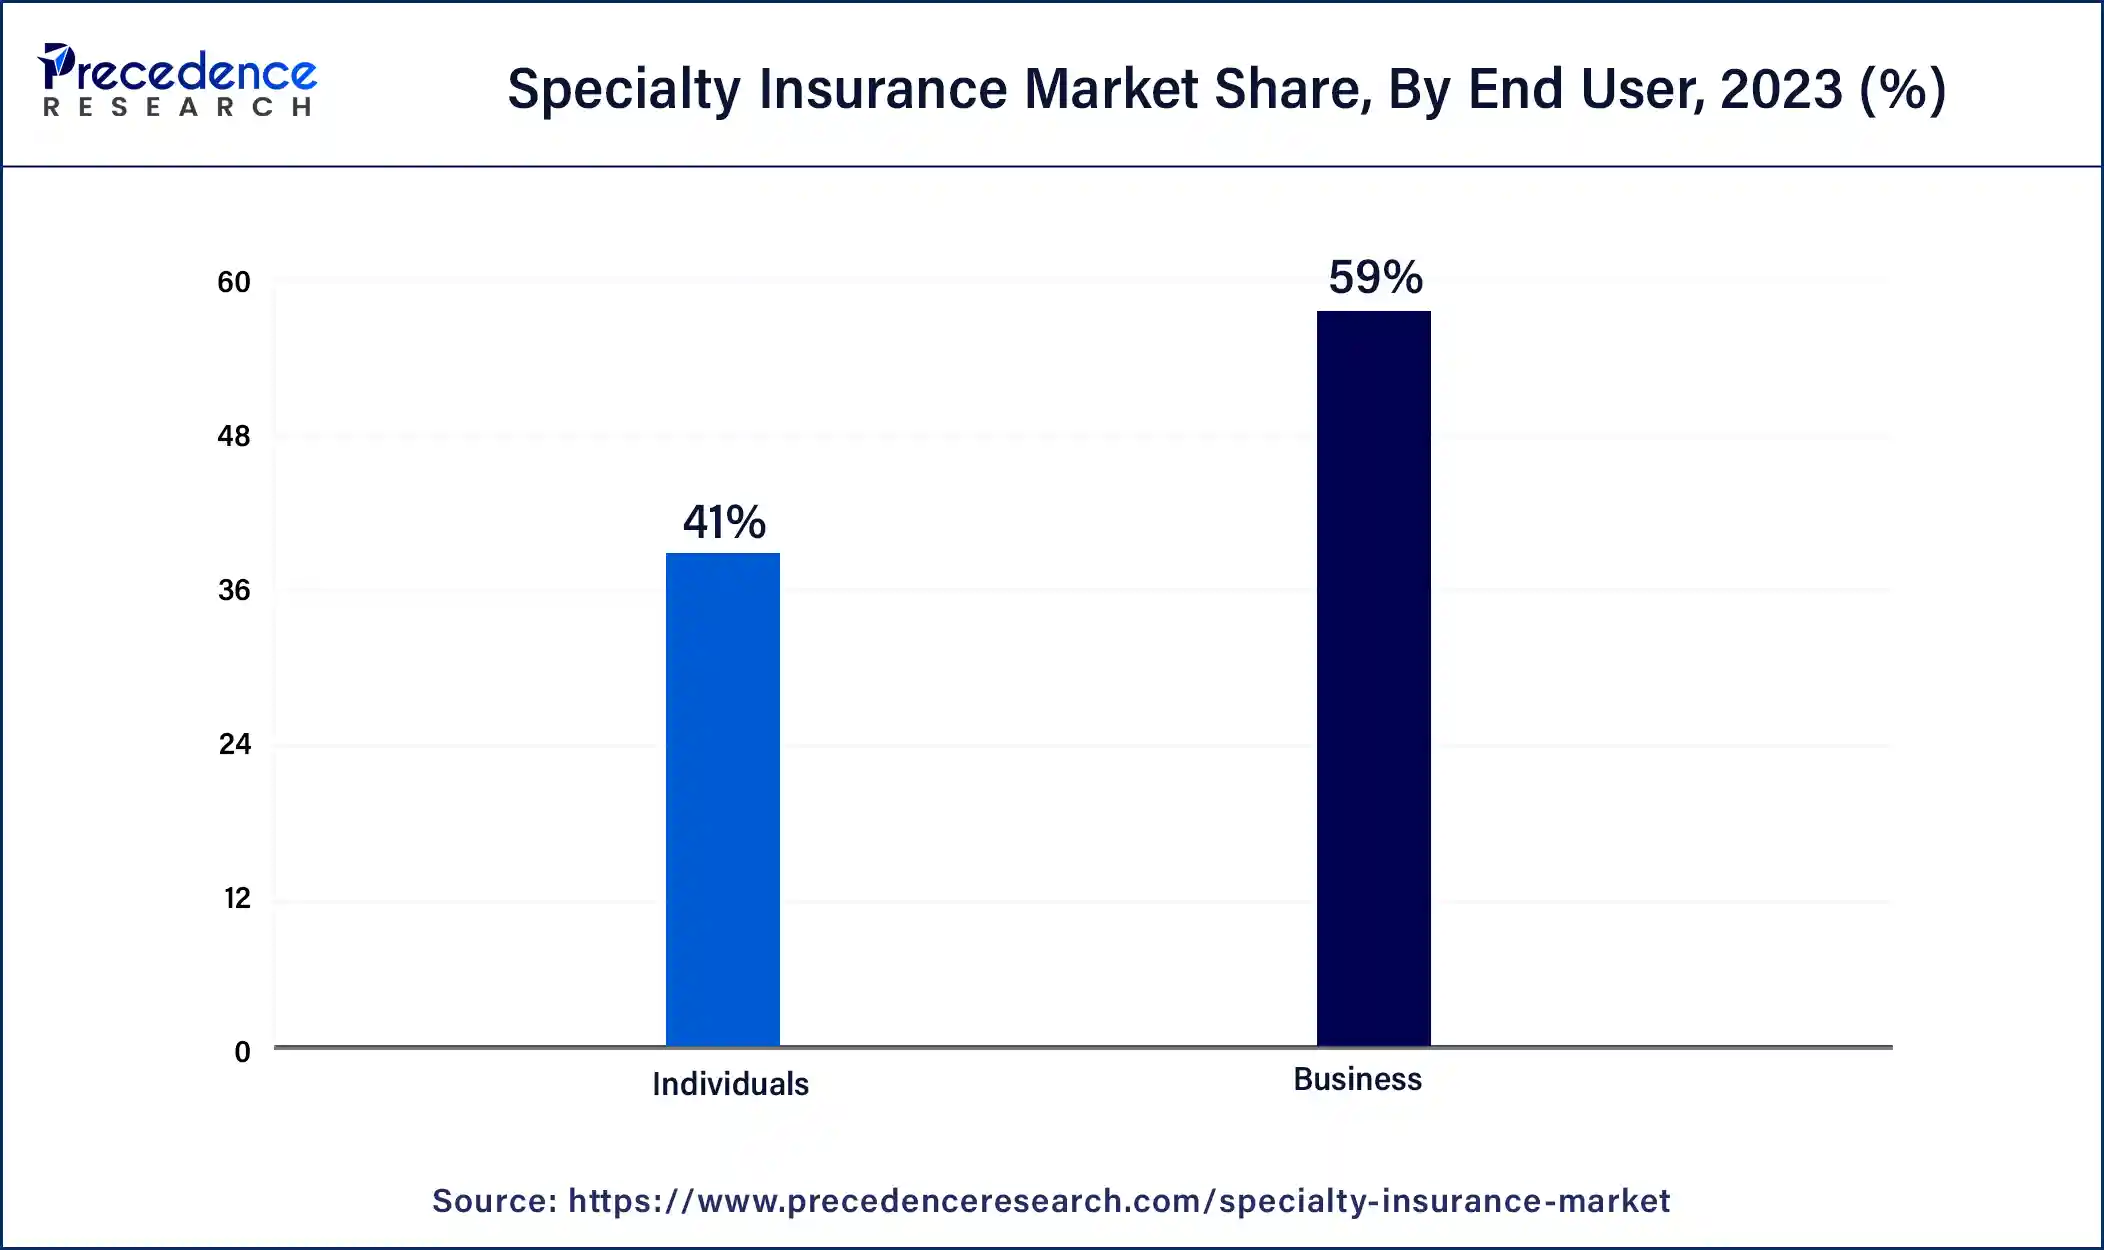 Specialty Insurance Market Share, By End User, 2023 (%)